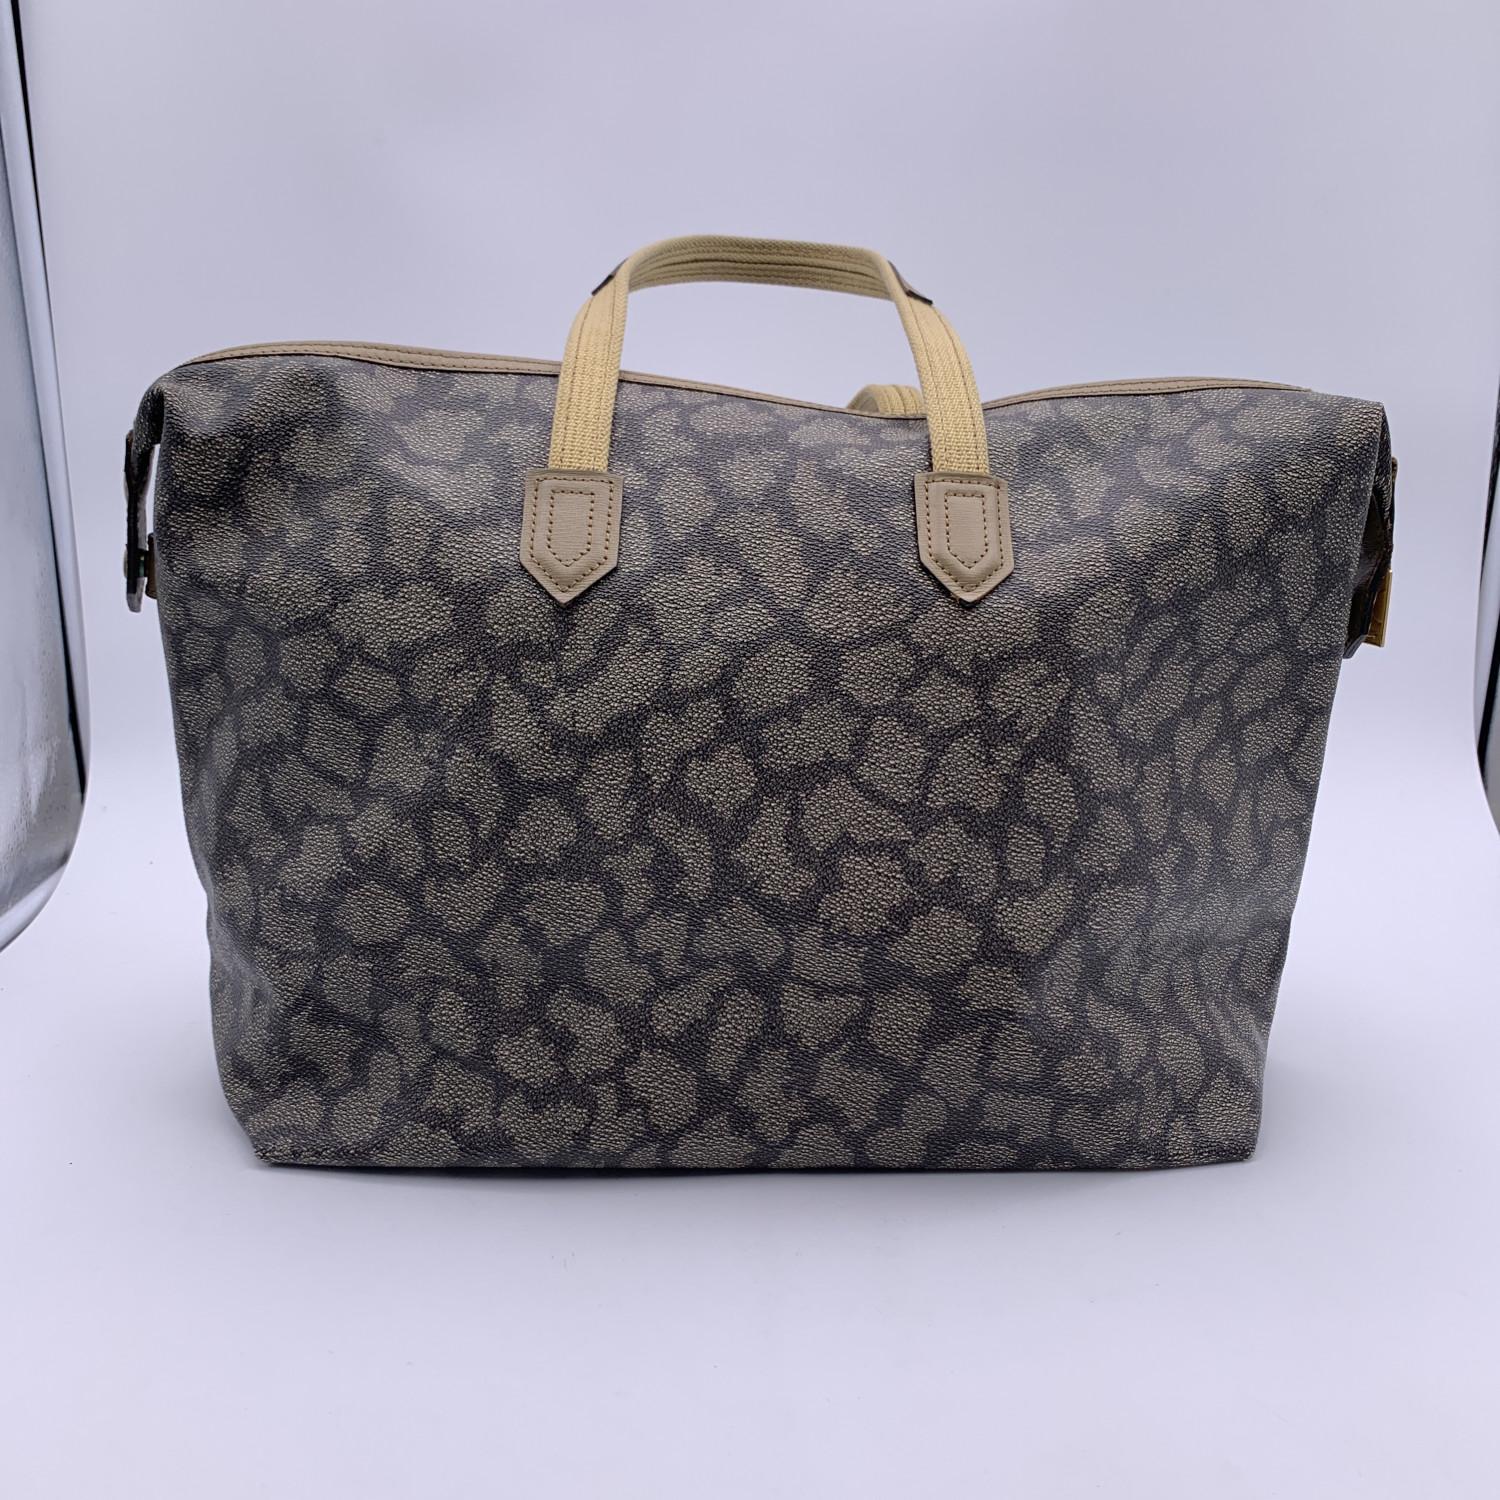 Yves Saint Laurent Vintage Tan Grey Giraffe Print Duffle Bag In Excellent Condition In Rome, Rome